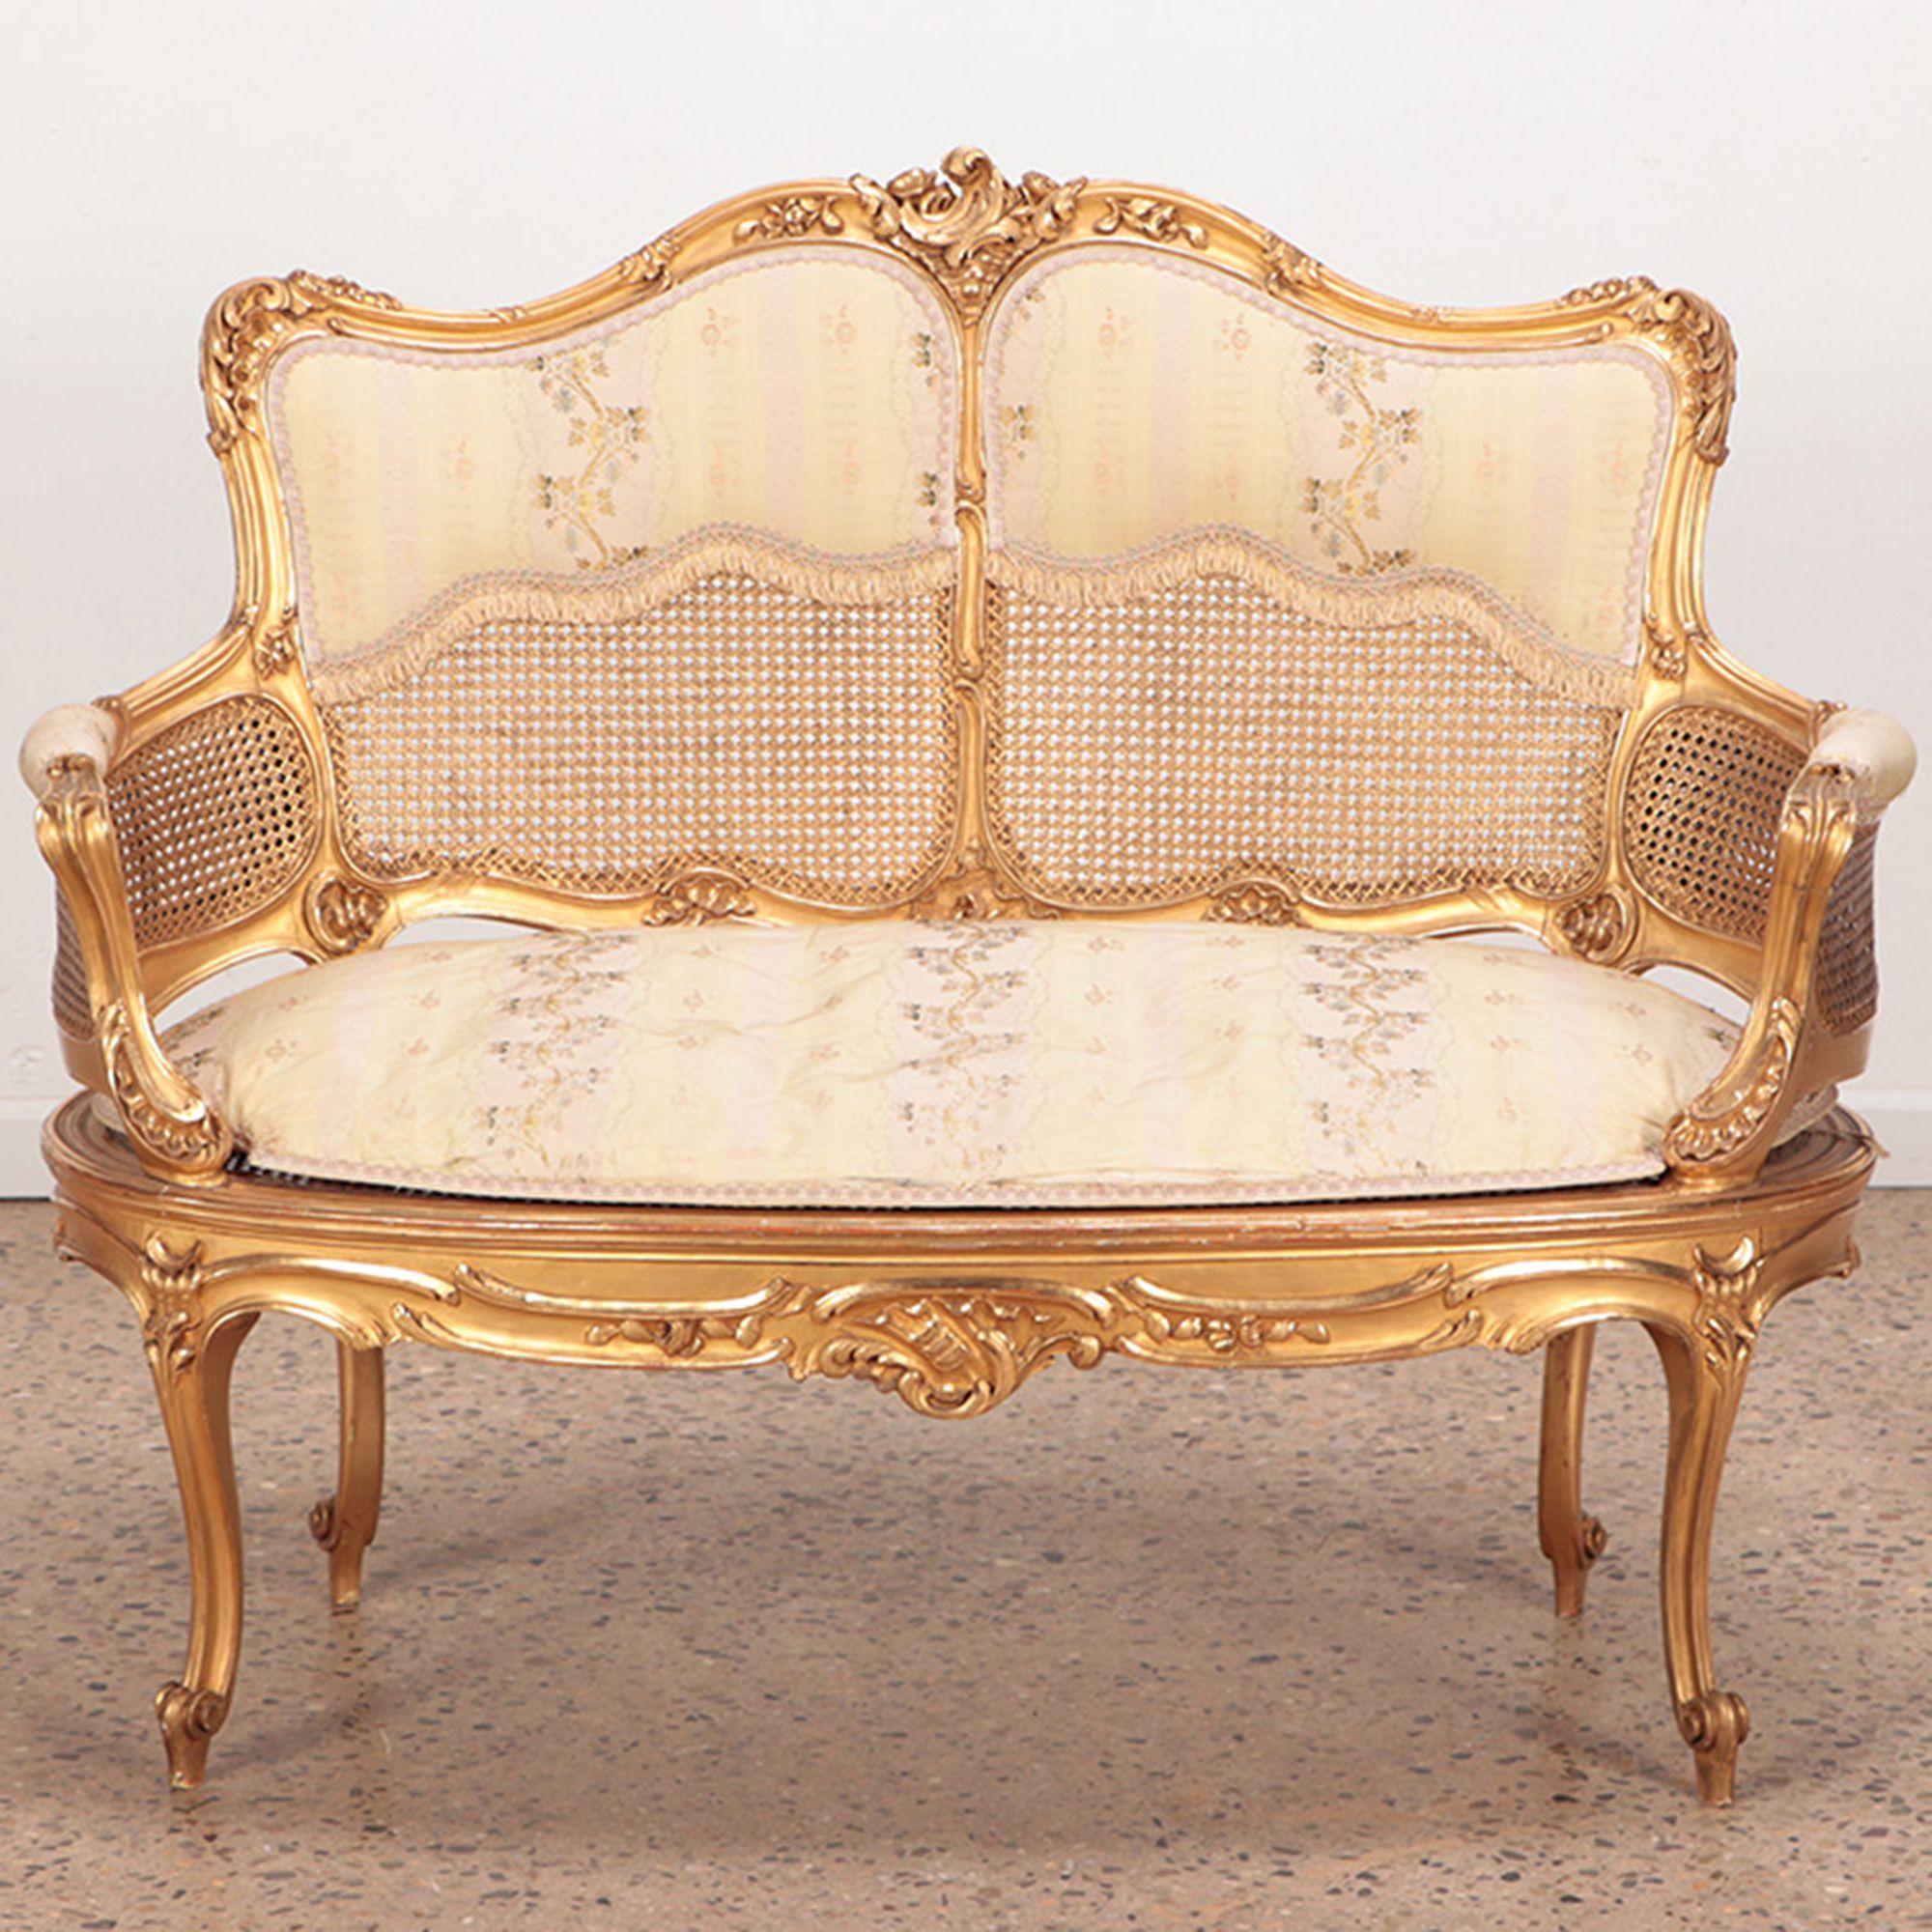 A giltwood and carved French Louis XV style settee in original gilt finish, circa 1900.